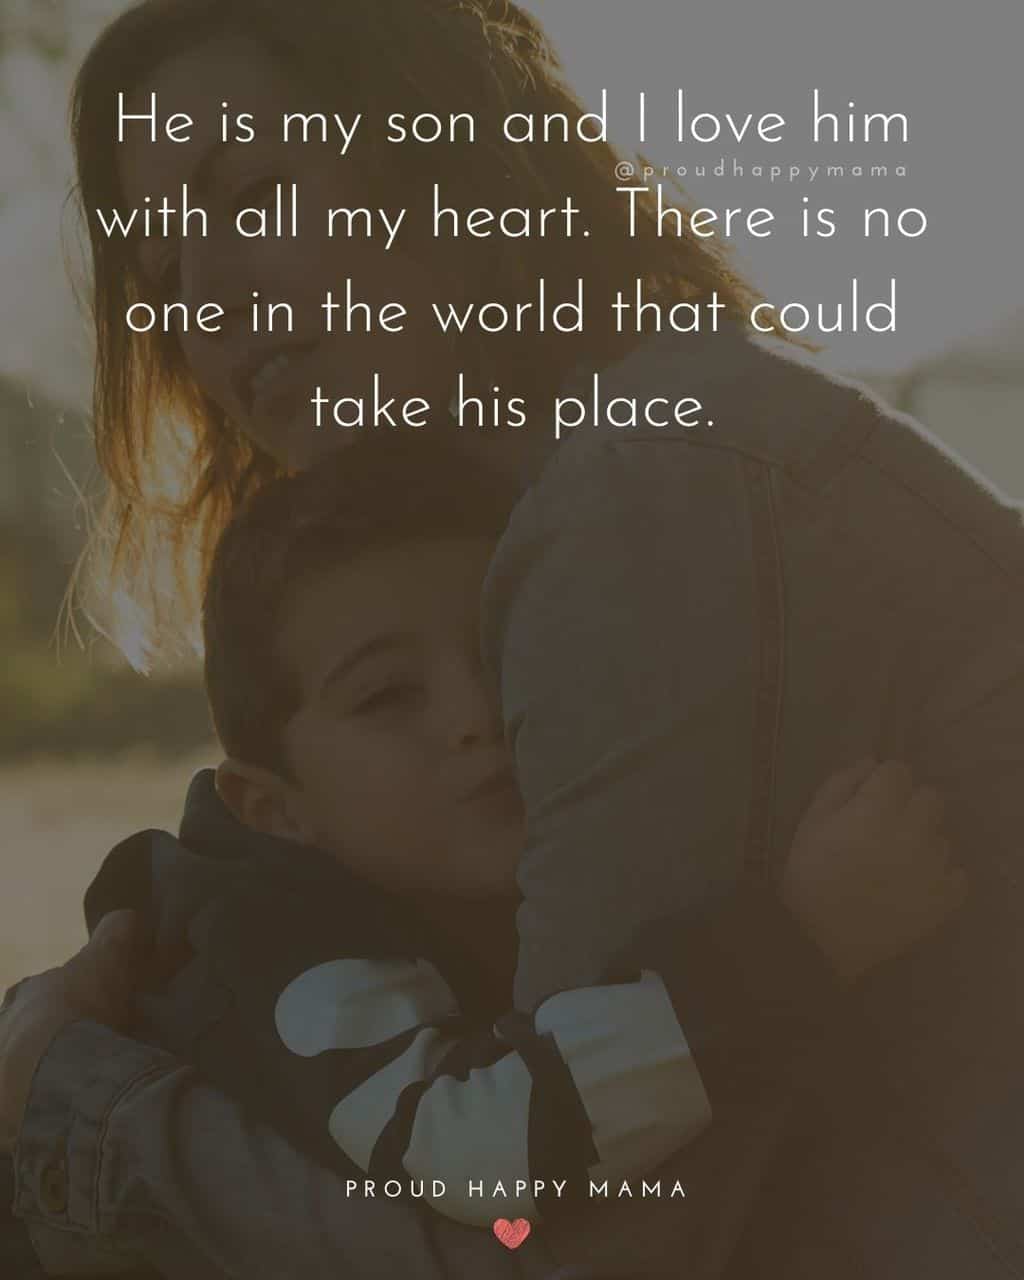 Son Quotes - He is my son and I love him with all my heart. There is no one in the world that could take his place.’